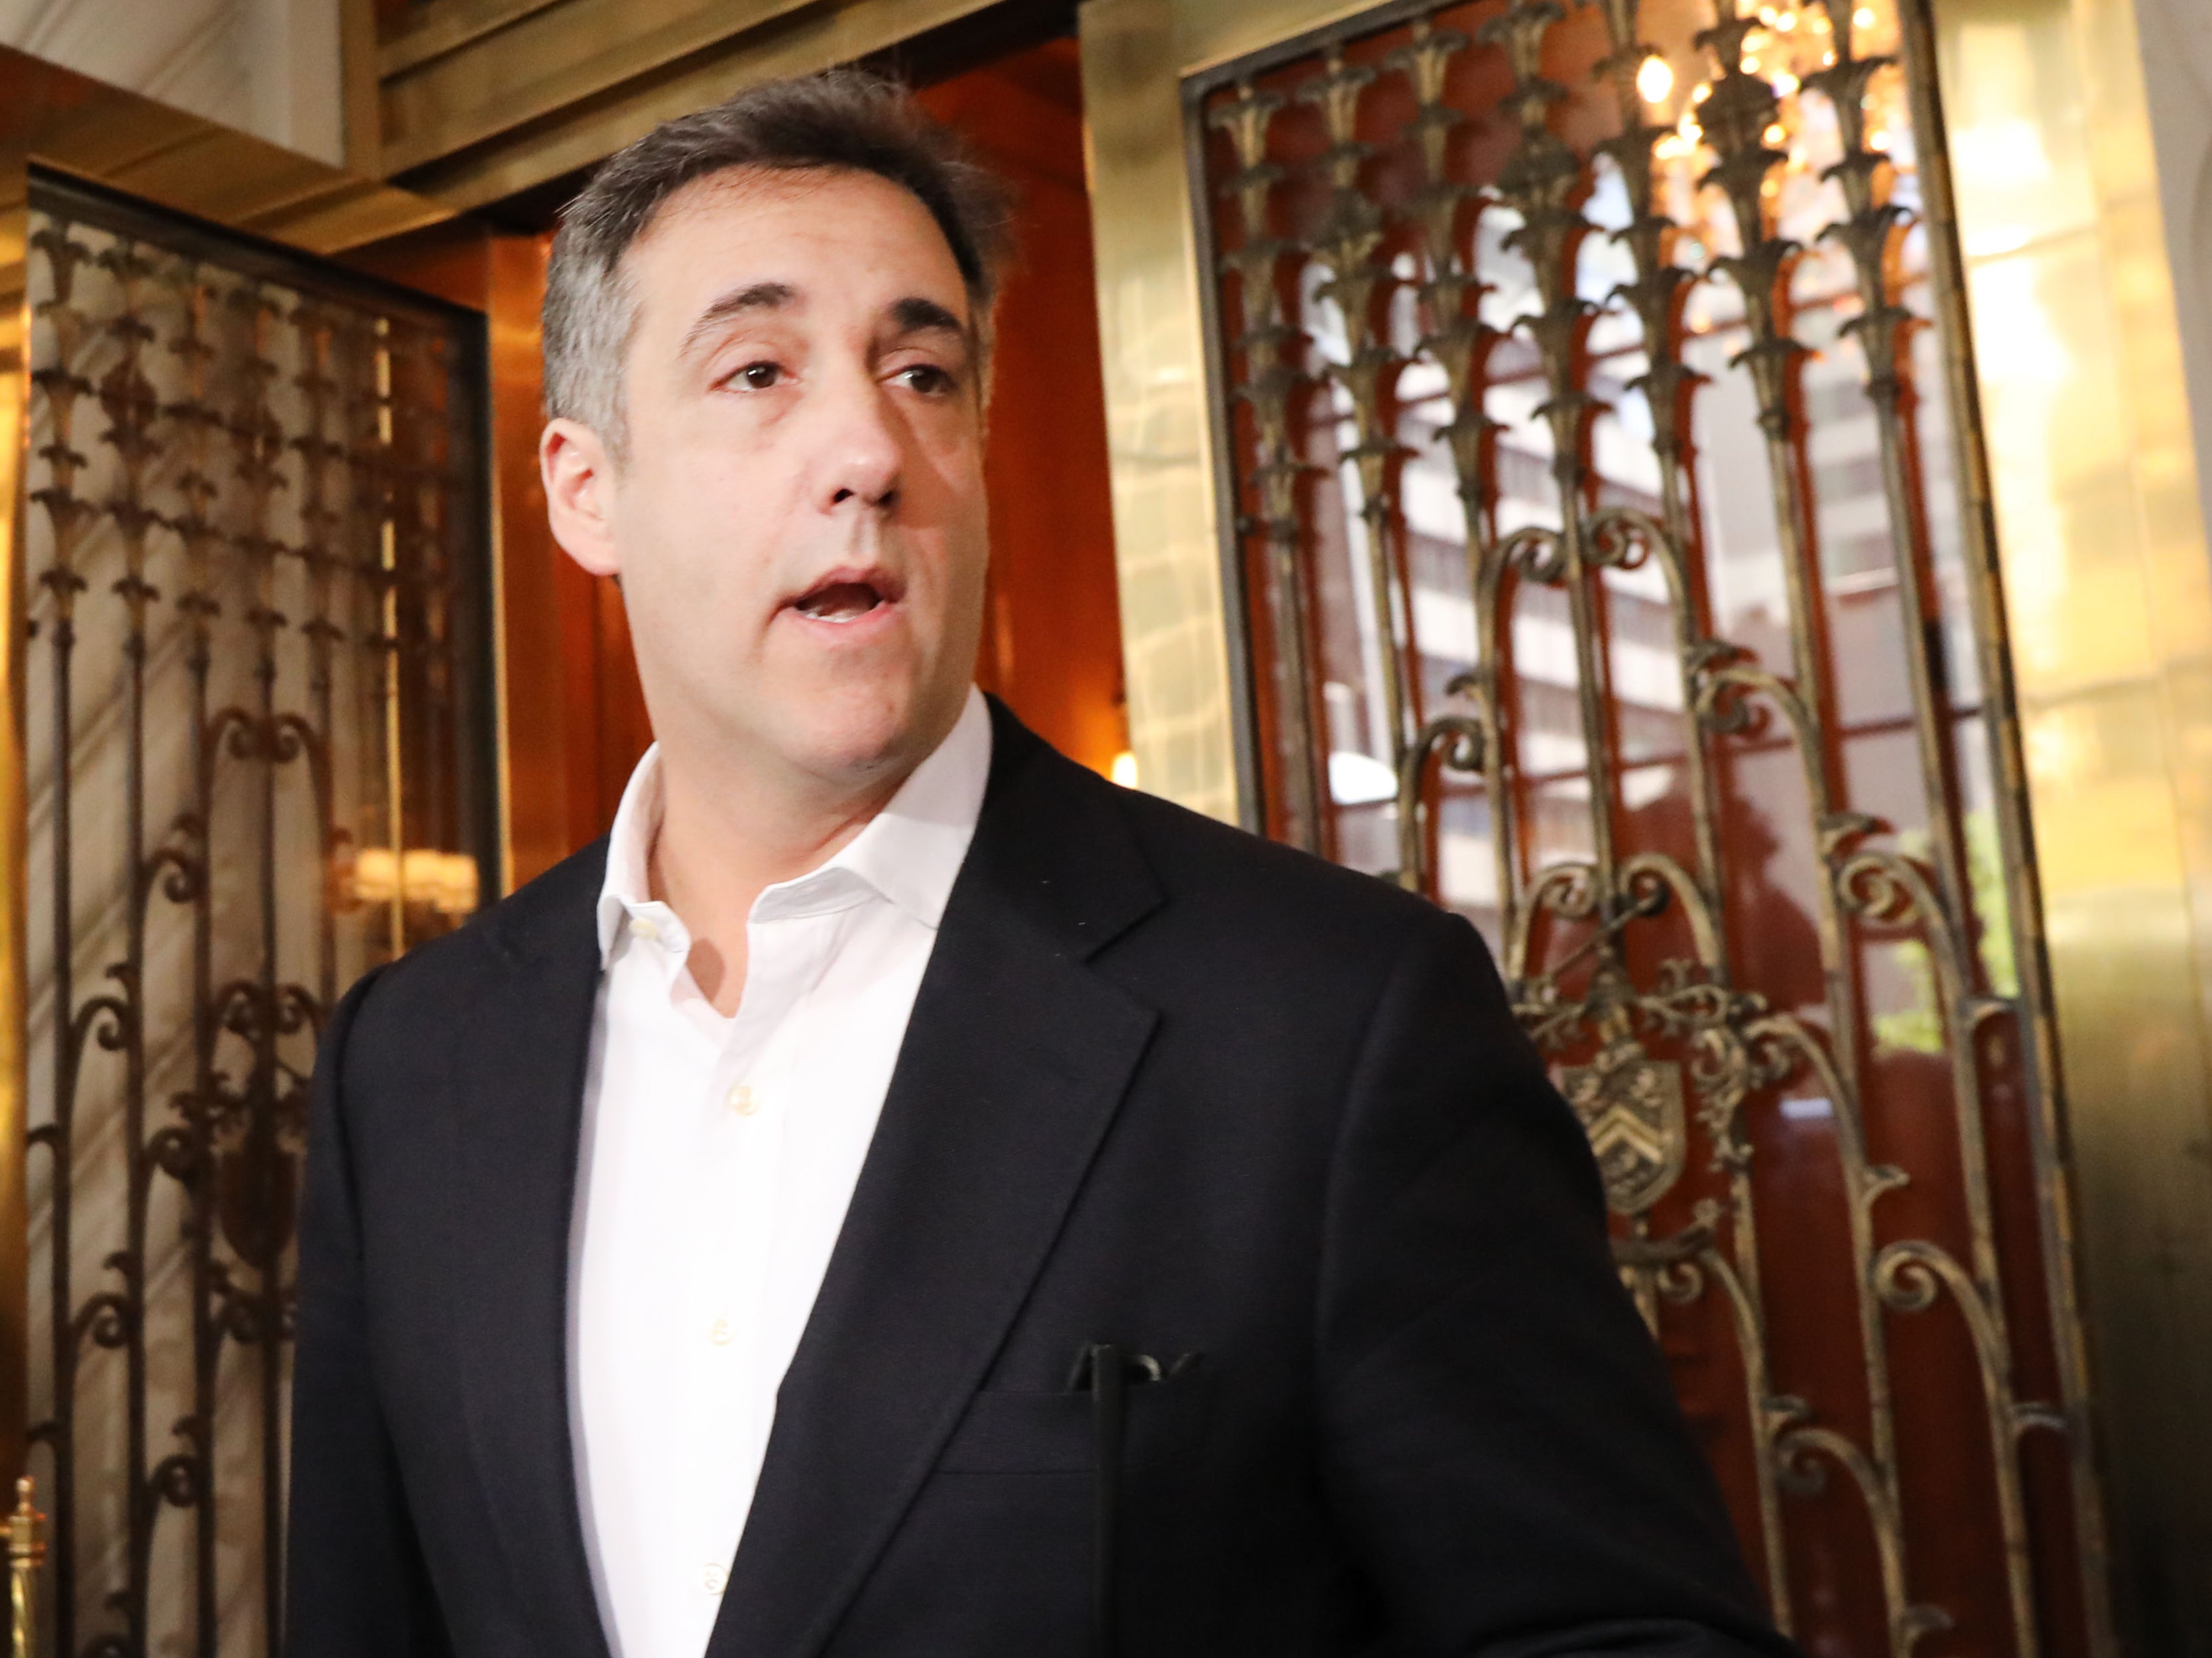 Michael Cohen, the former personal attorney to President Donald Trump, prepares to speak to the media before departing his Manhattan apartment for prison on 6 May, 2019 in New York City. Cohen has said the charges against the Trump Organization and its CFO are just the ‘tip of the iceberg’.